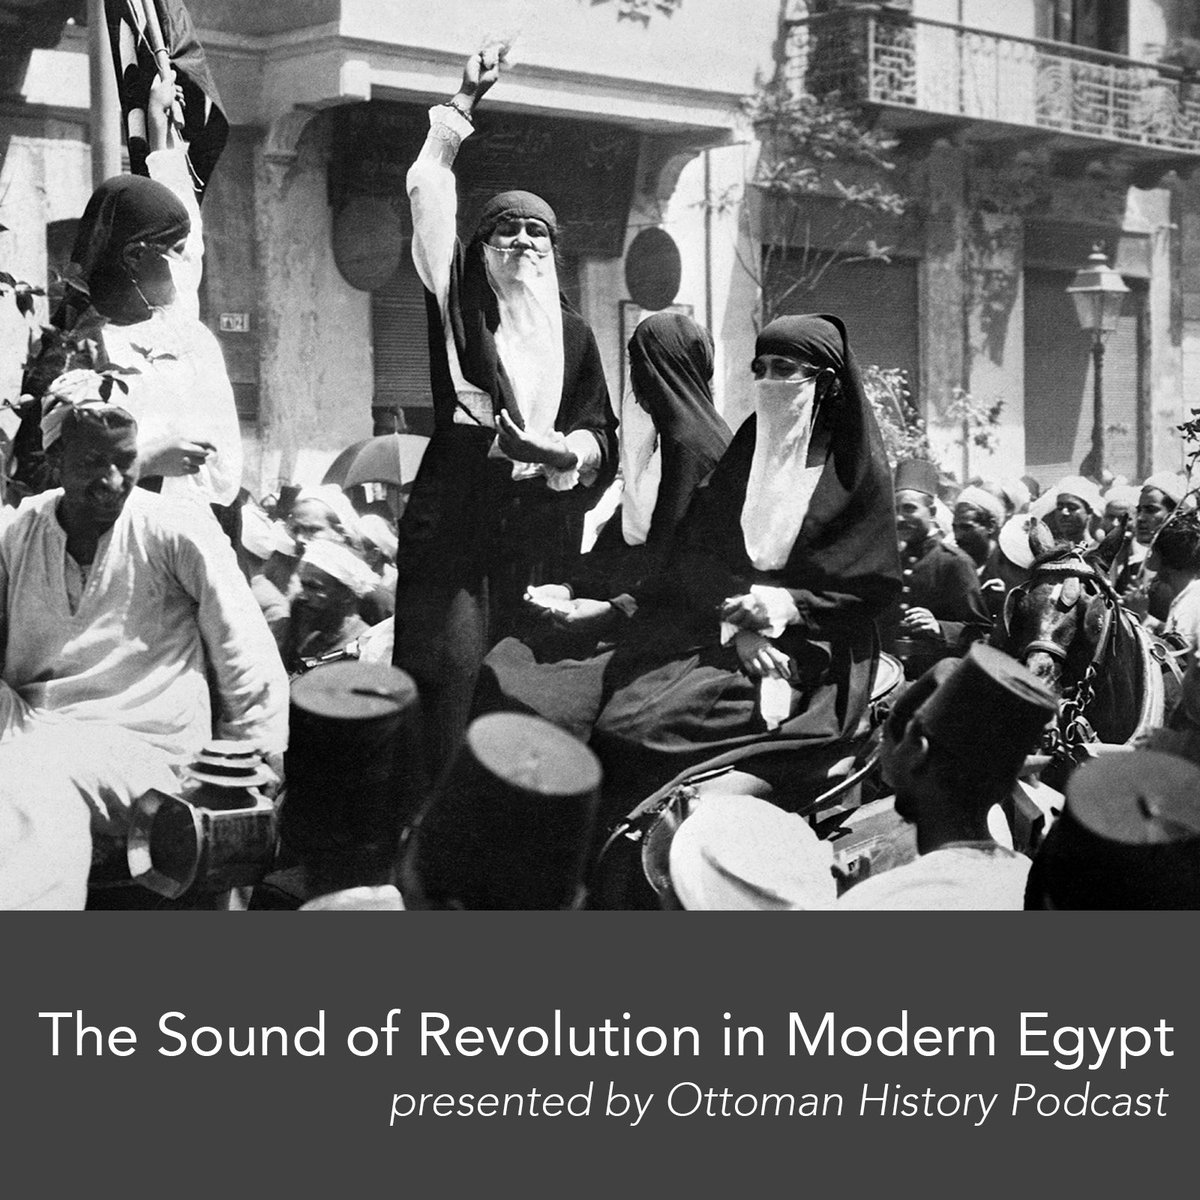 Since “The Sound of Revolution in Modern Egypt” debuted with the @OttomanHistory Podcast, the 4-part  series has generated more than 32,000 “plays.” Thank you to everyone who has listened and to anyone who still might tune into this modern Egypt mixtape 🎧ottomanhistorypodcast.com/p/the-sound-of…